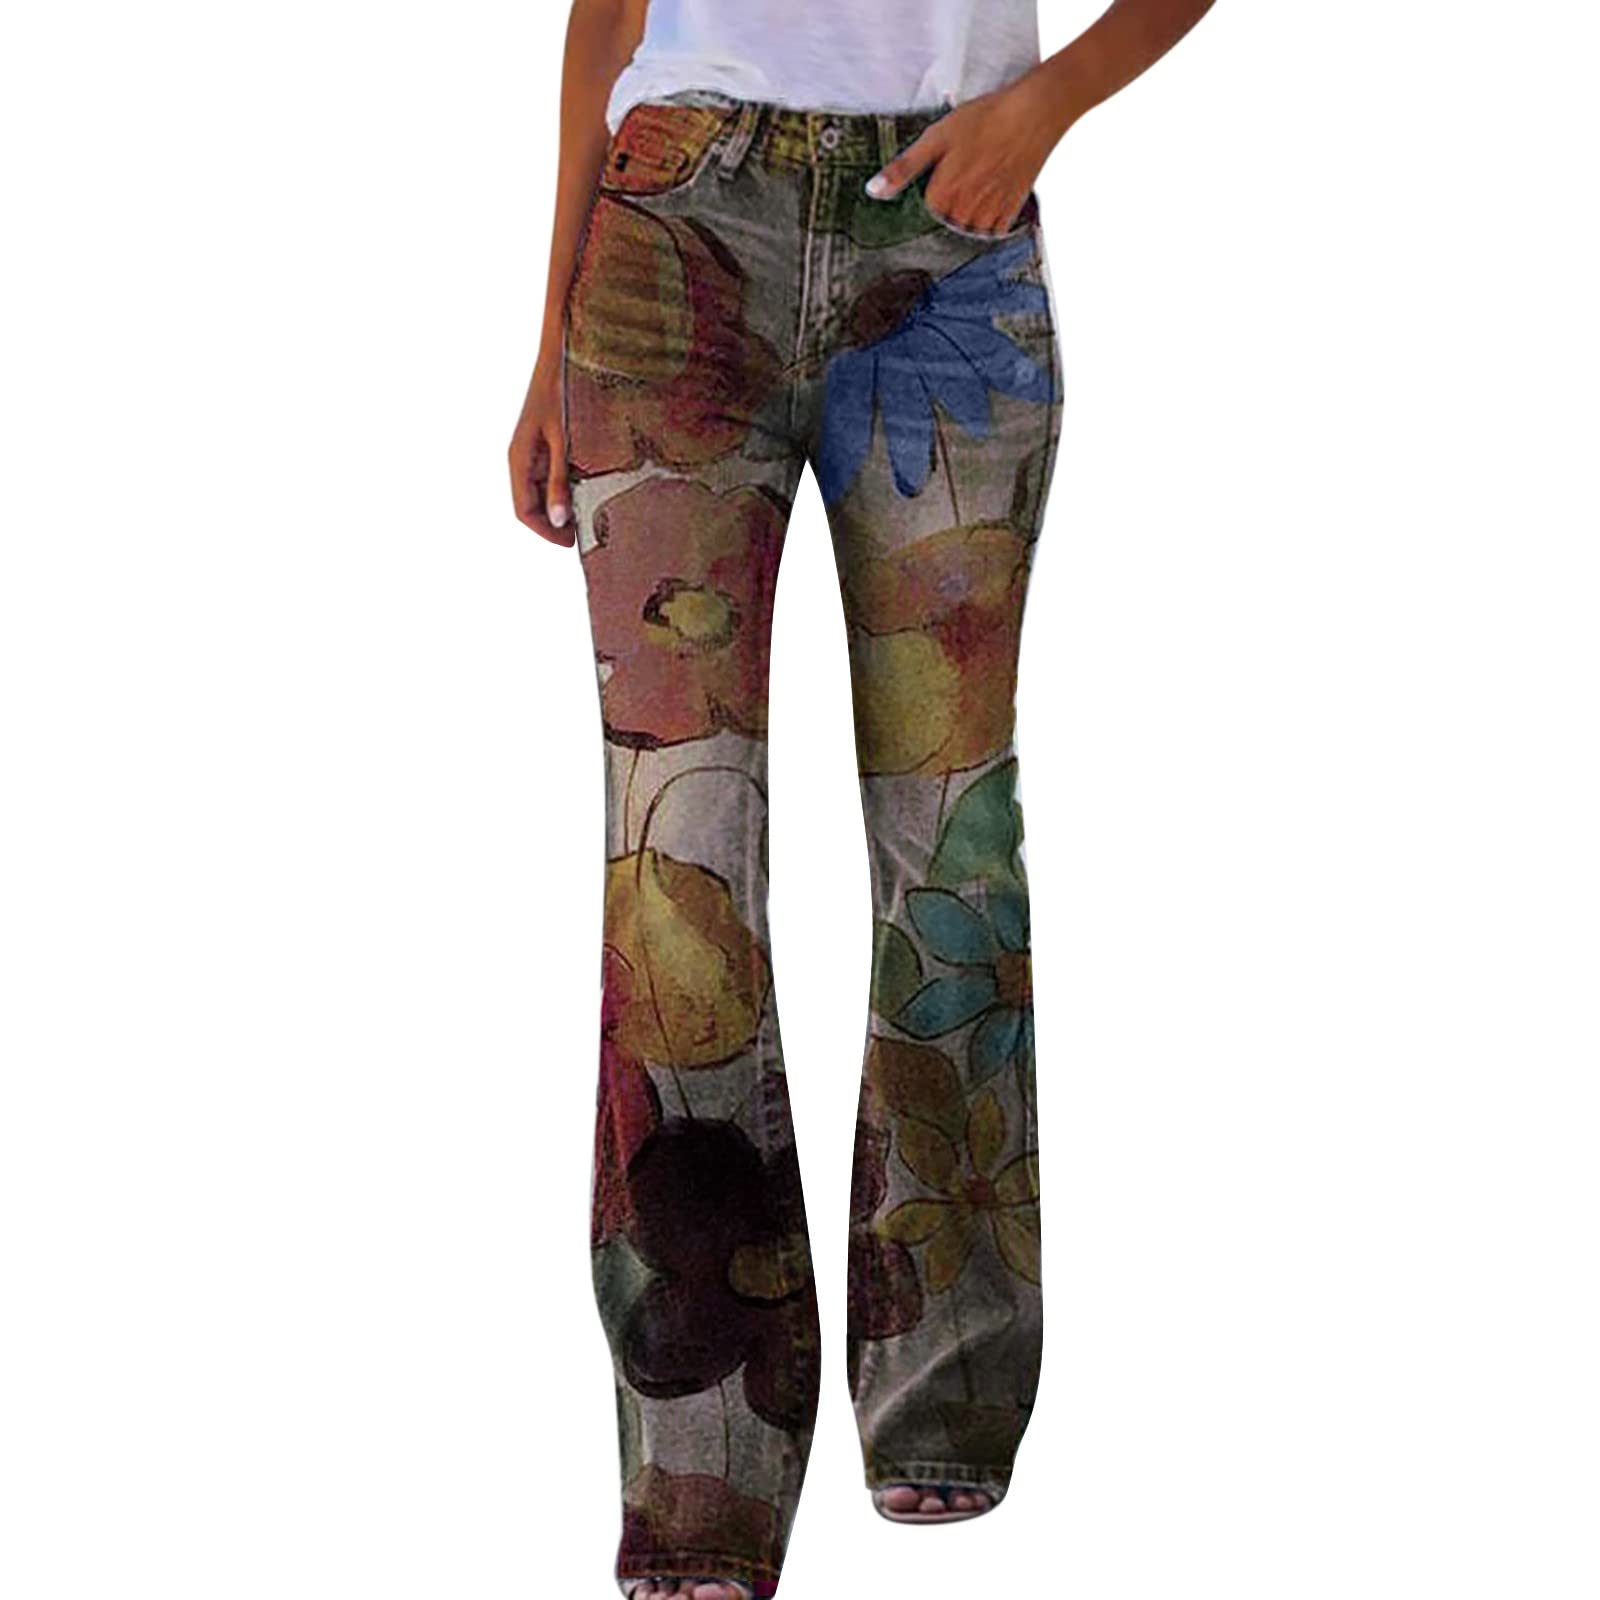 Plus Floral Print High Waisted Jeggings